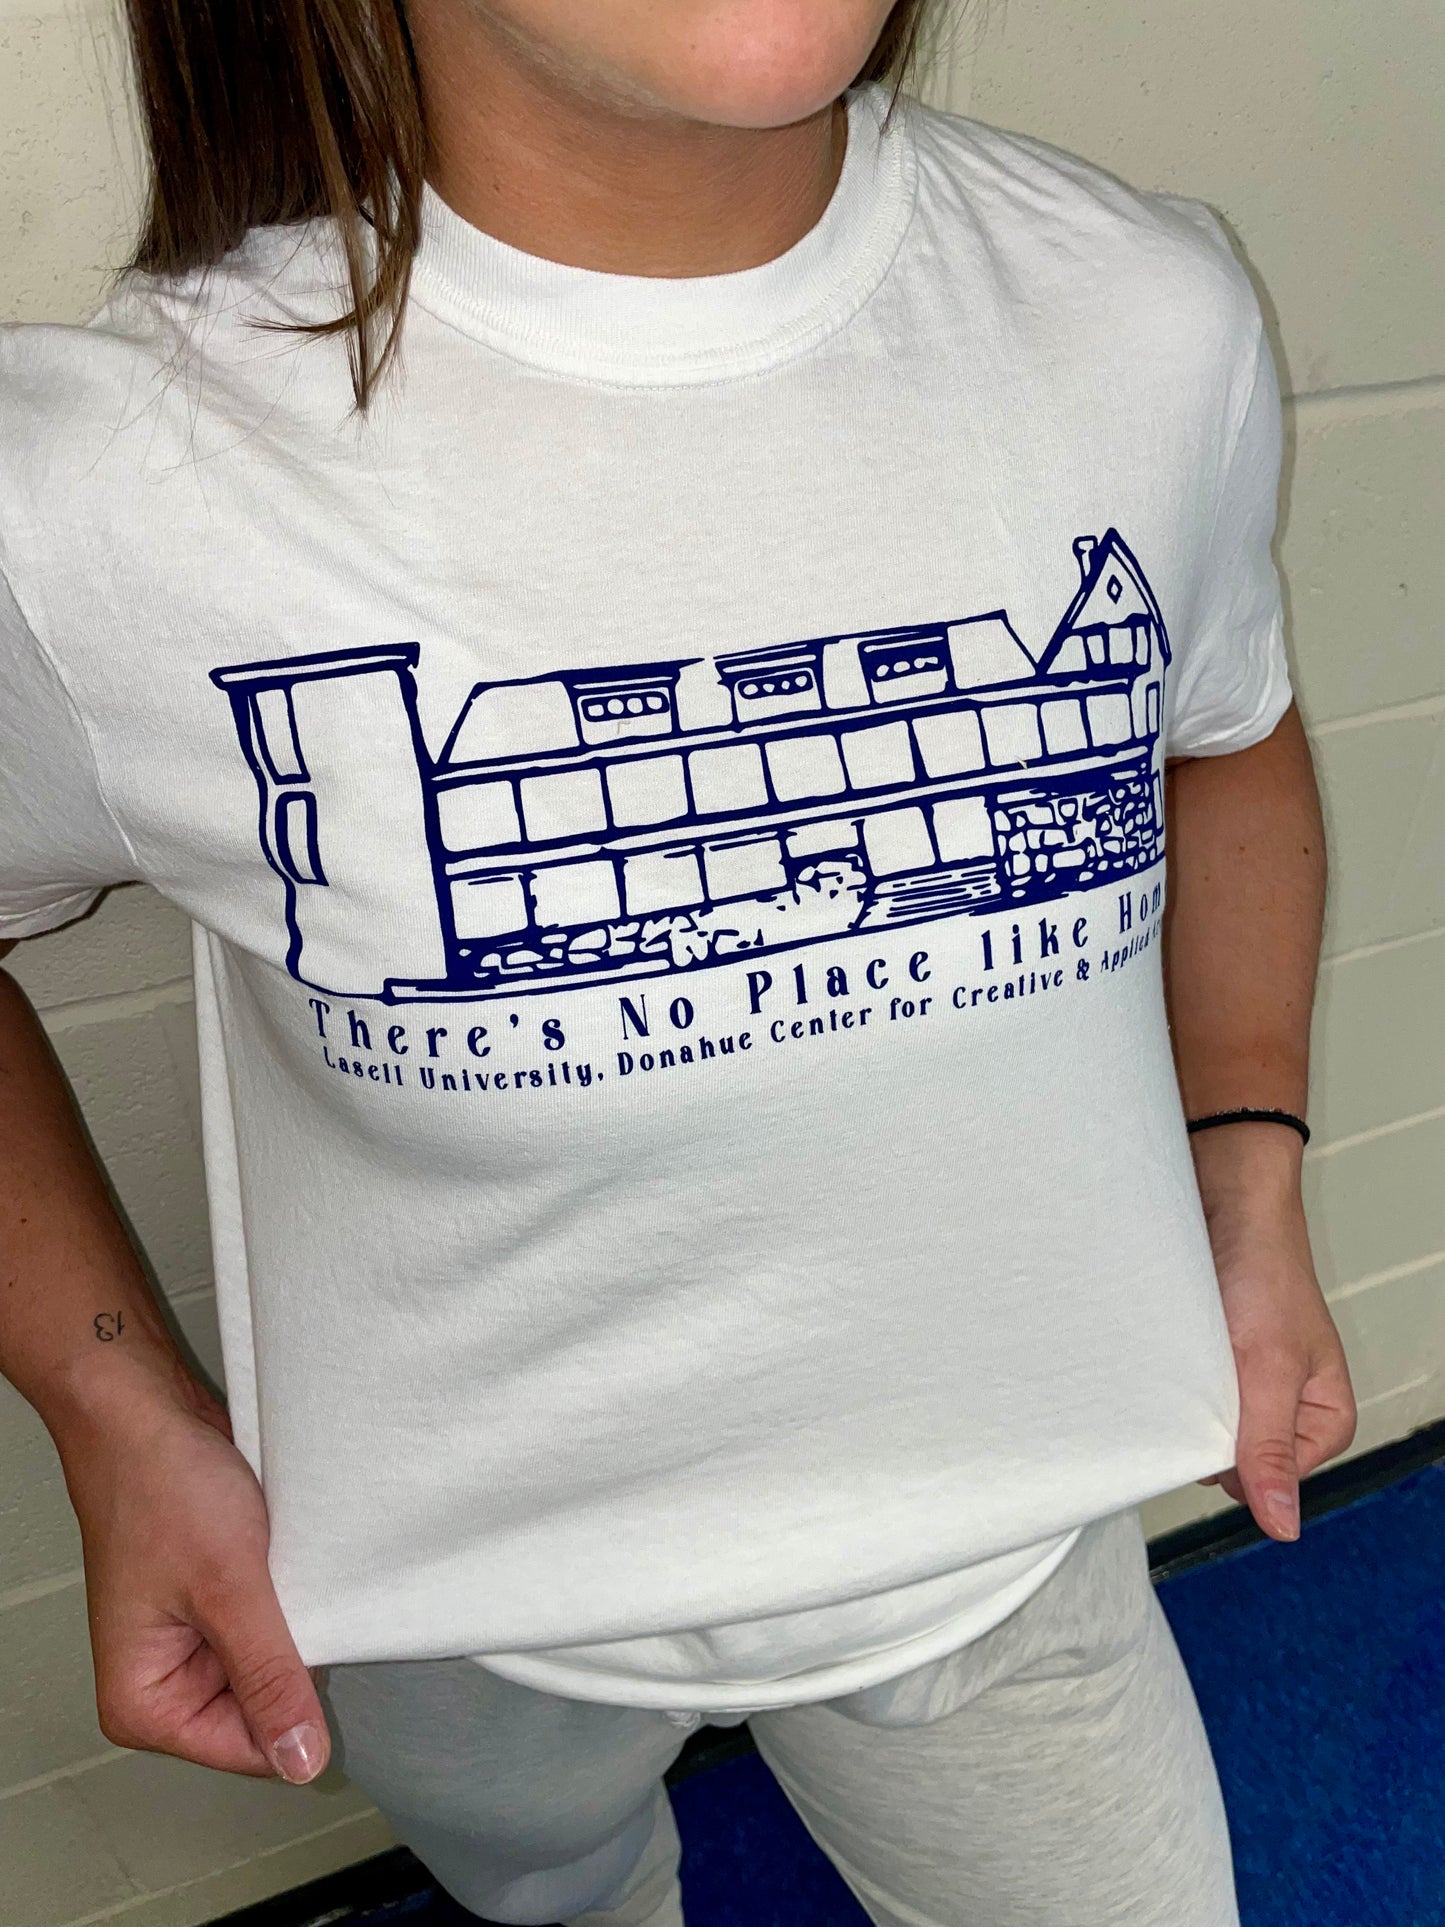 "There's No Place Like Home" Donahue T-Shirt